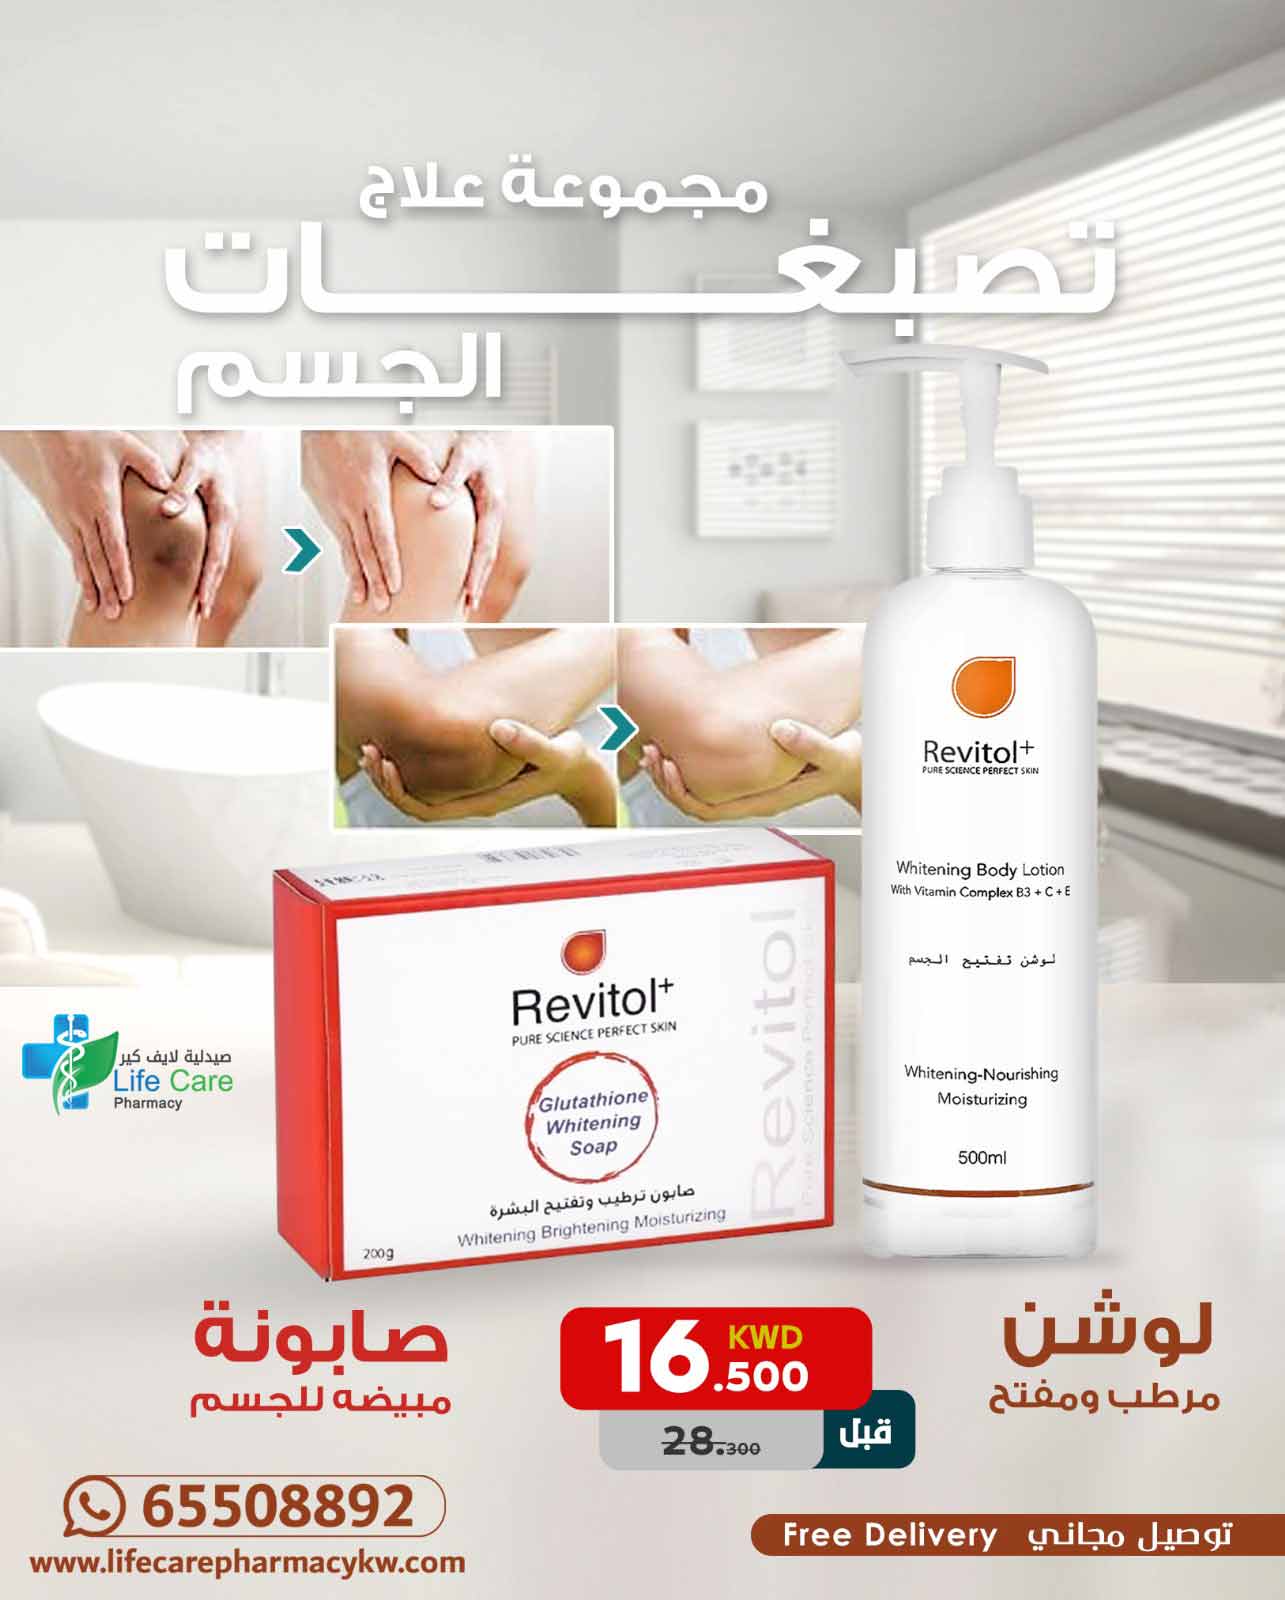 PACKAGE 277 - Life Care Pharmacy